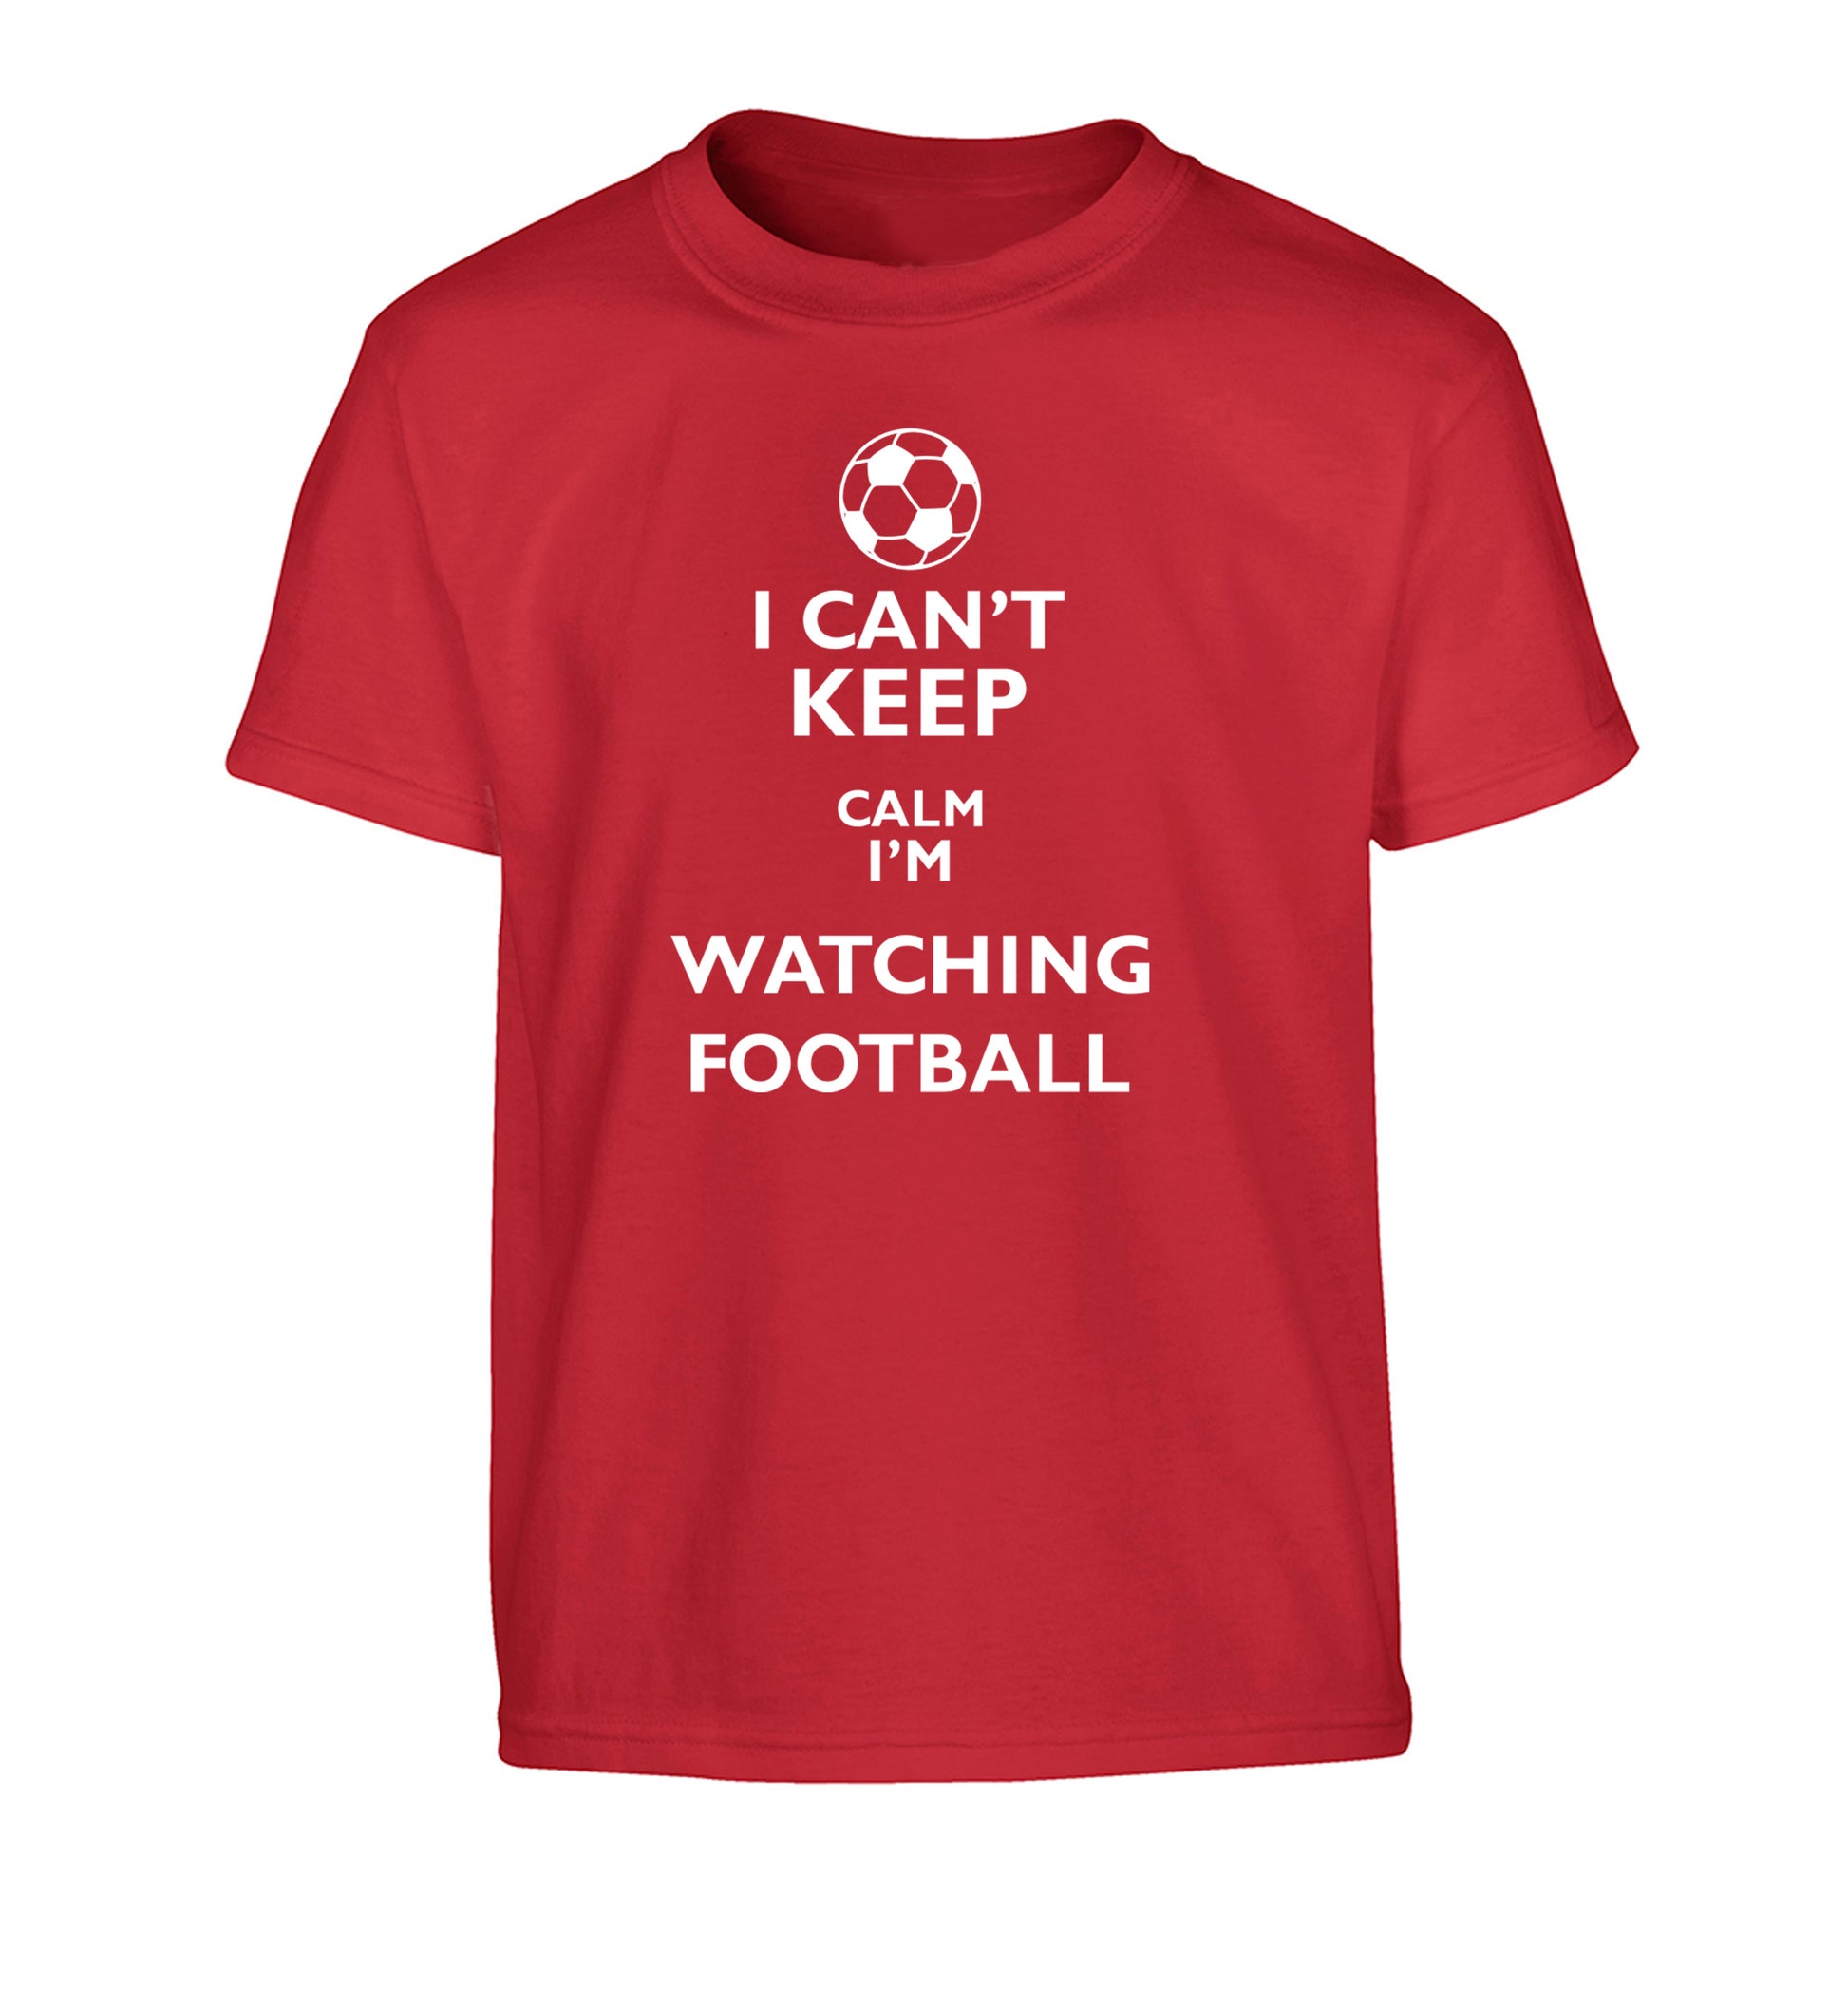 I can't keep calm I'm watching the football Children's red Tshirt 12-14 Years